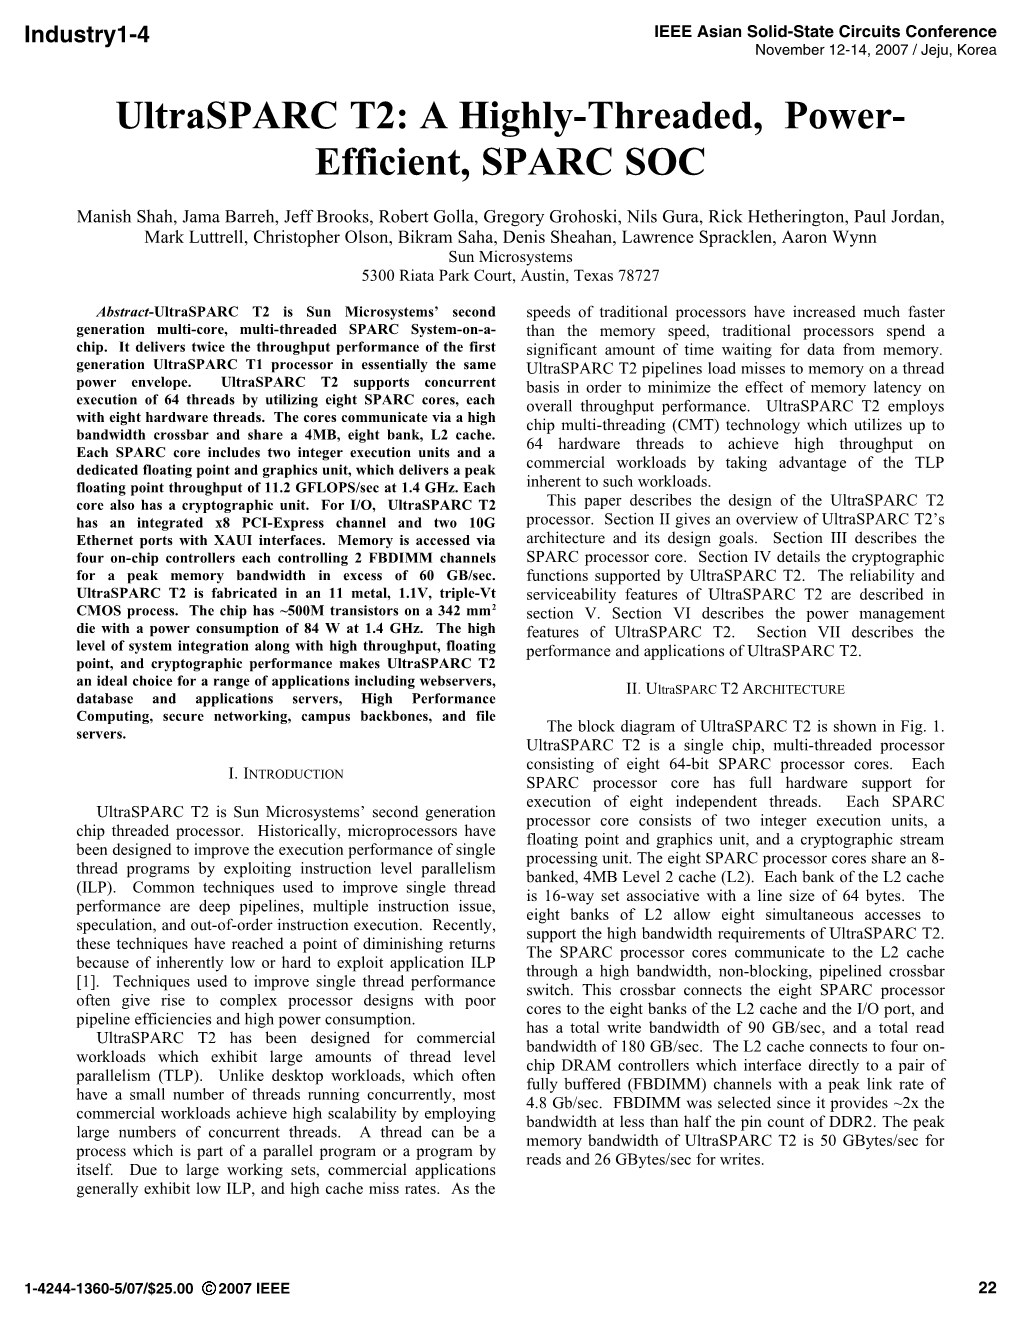 Industry1-4 Ultrasparc T2: a Highly Threaded Power Efficient SPARC